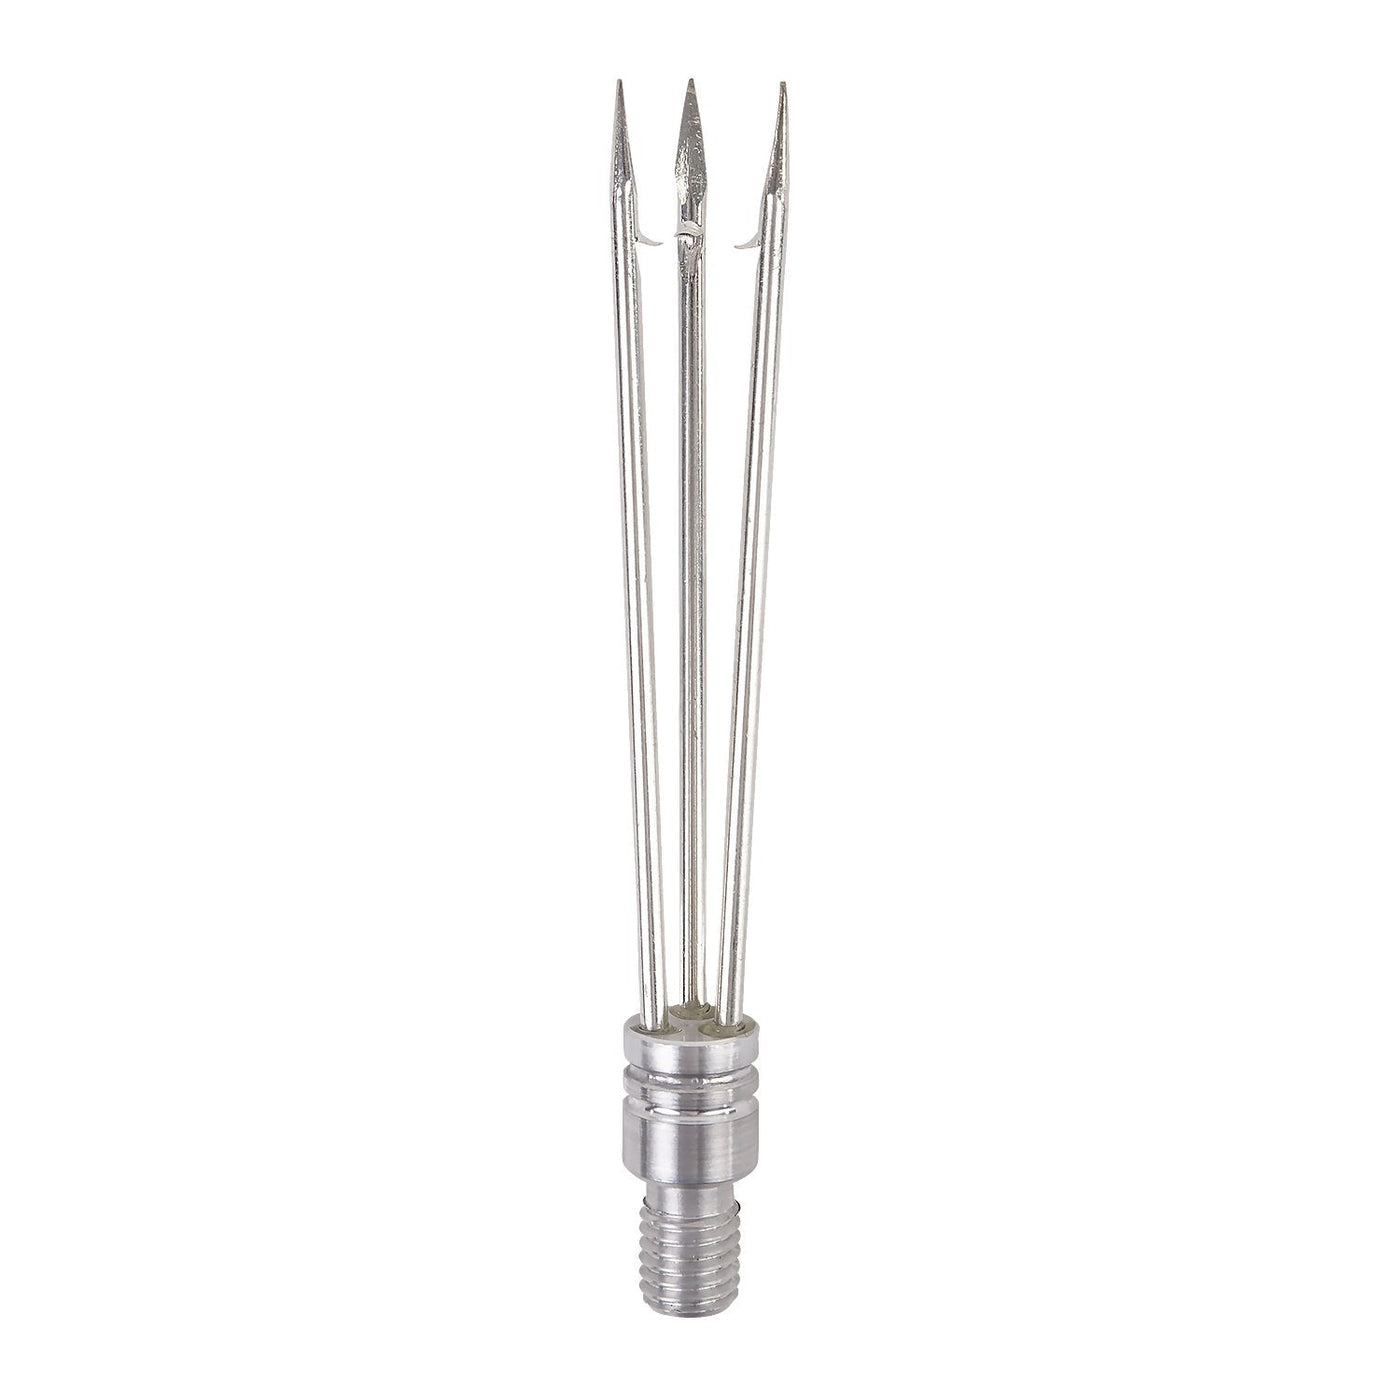 IST Aluminum Pole Spear with Sling, Paralyzer Tip 3-Prong Tip